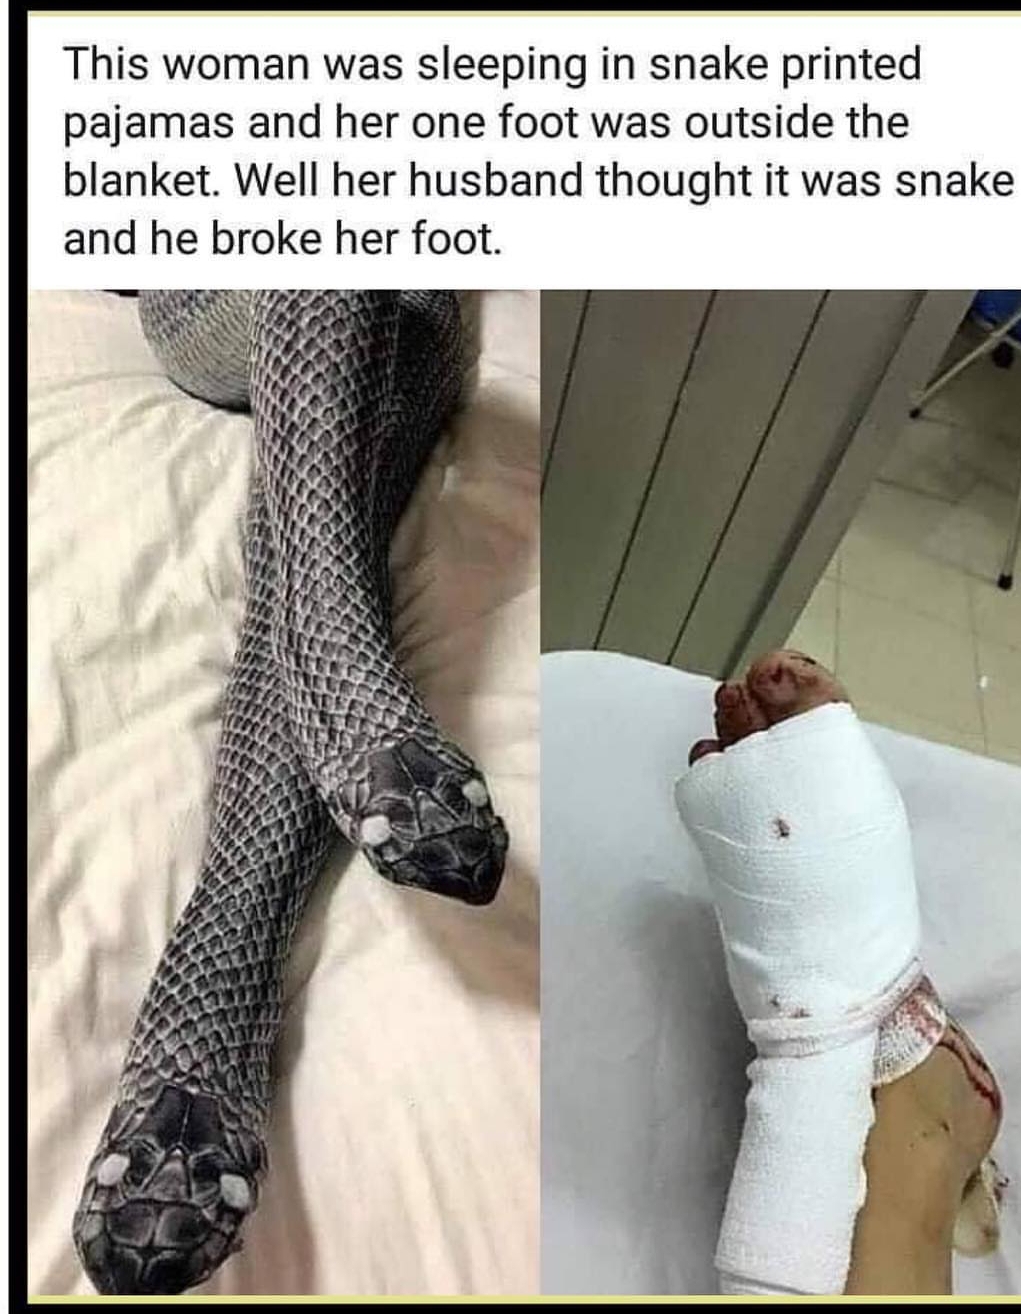 snake pajamas meme - This woman was sleeping in snake printed pajamas and her one foot was outside the blanket. Well her husband thought it was snake and he broke her foot. She On